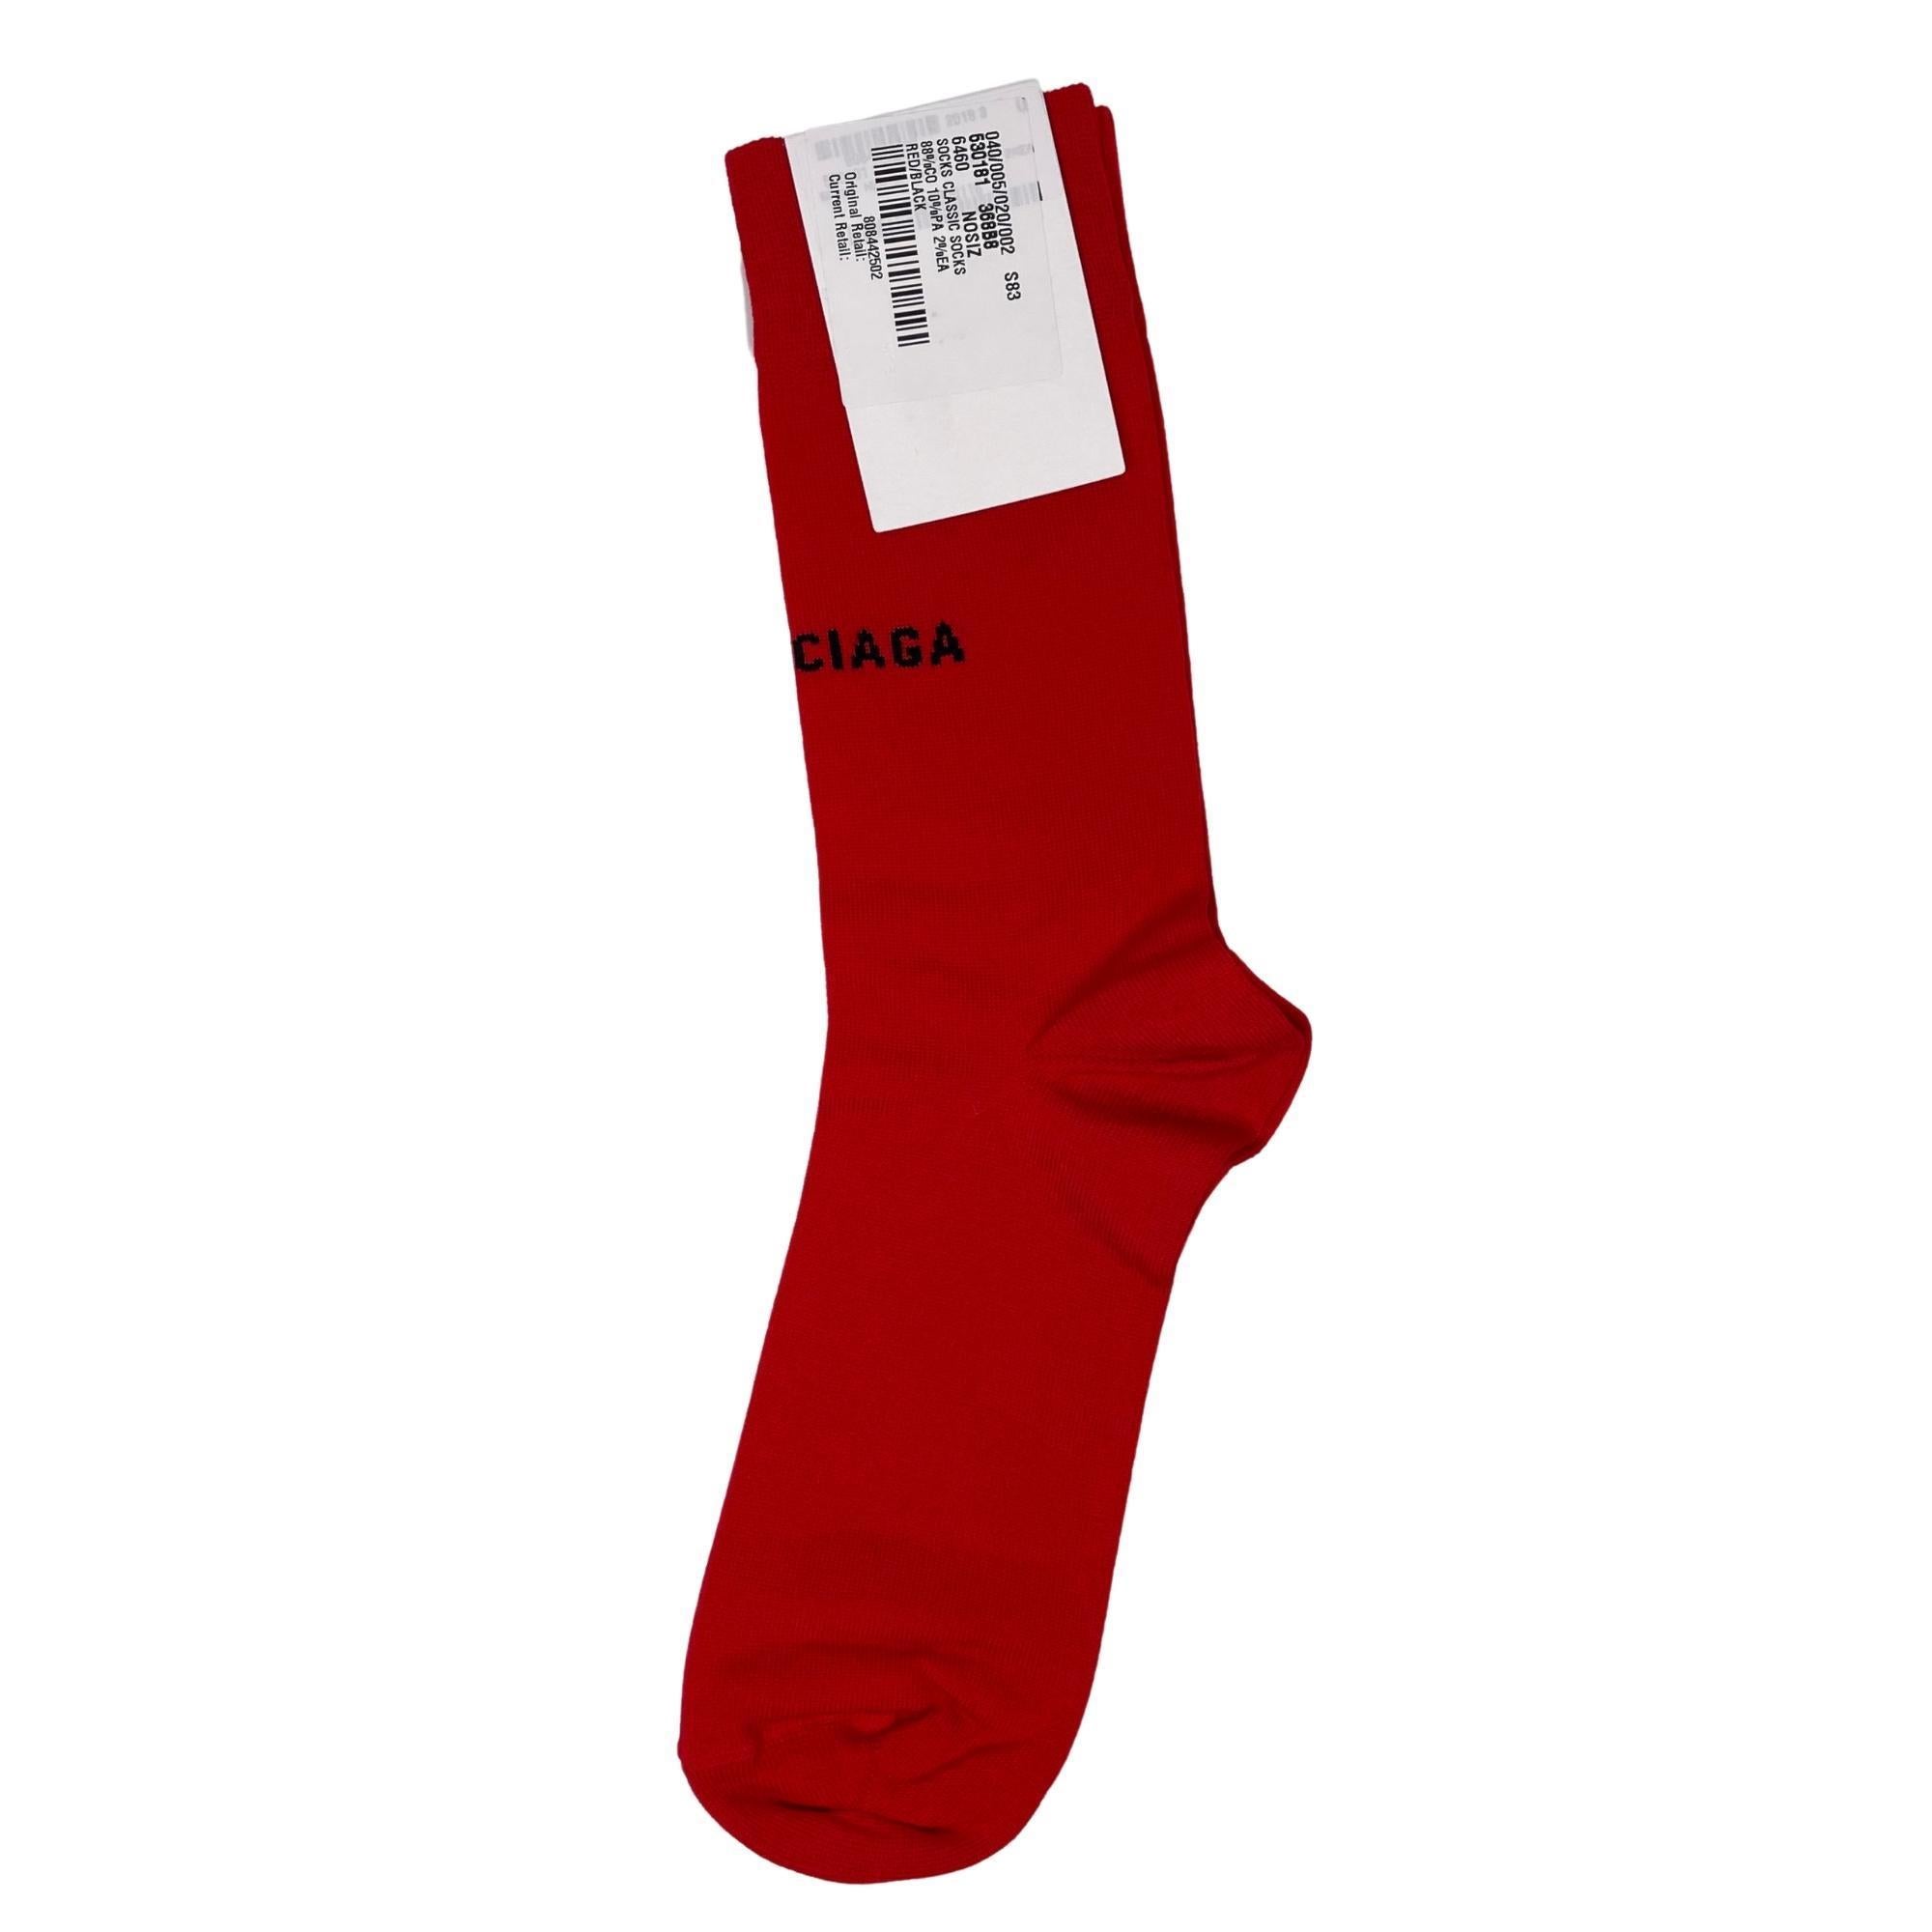 COLOR: Red
MATERIAL: 80% Cotton & 18% Polyamide & 2% Elastane
ITEM CODE: 530181 NOSIZ
SIZE: Medium 9 (20-22 cm)
COMES WITH: Box
CONDITION: Brand new.

Made in Italy